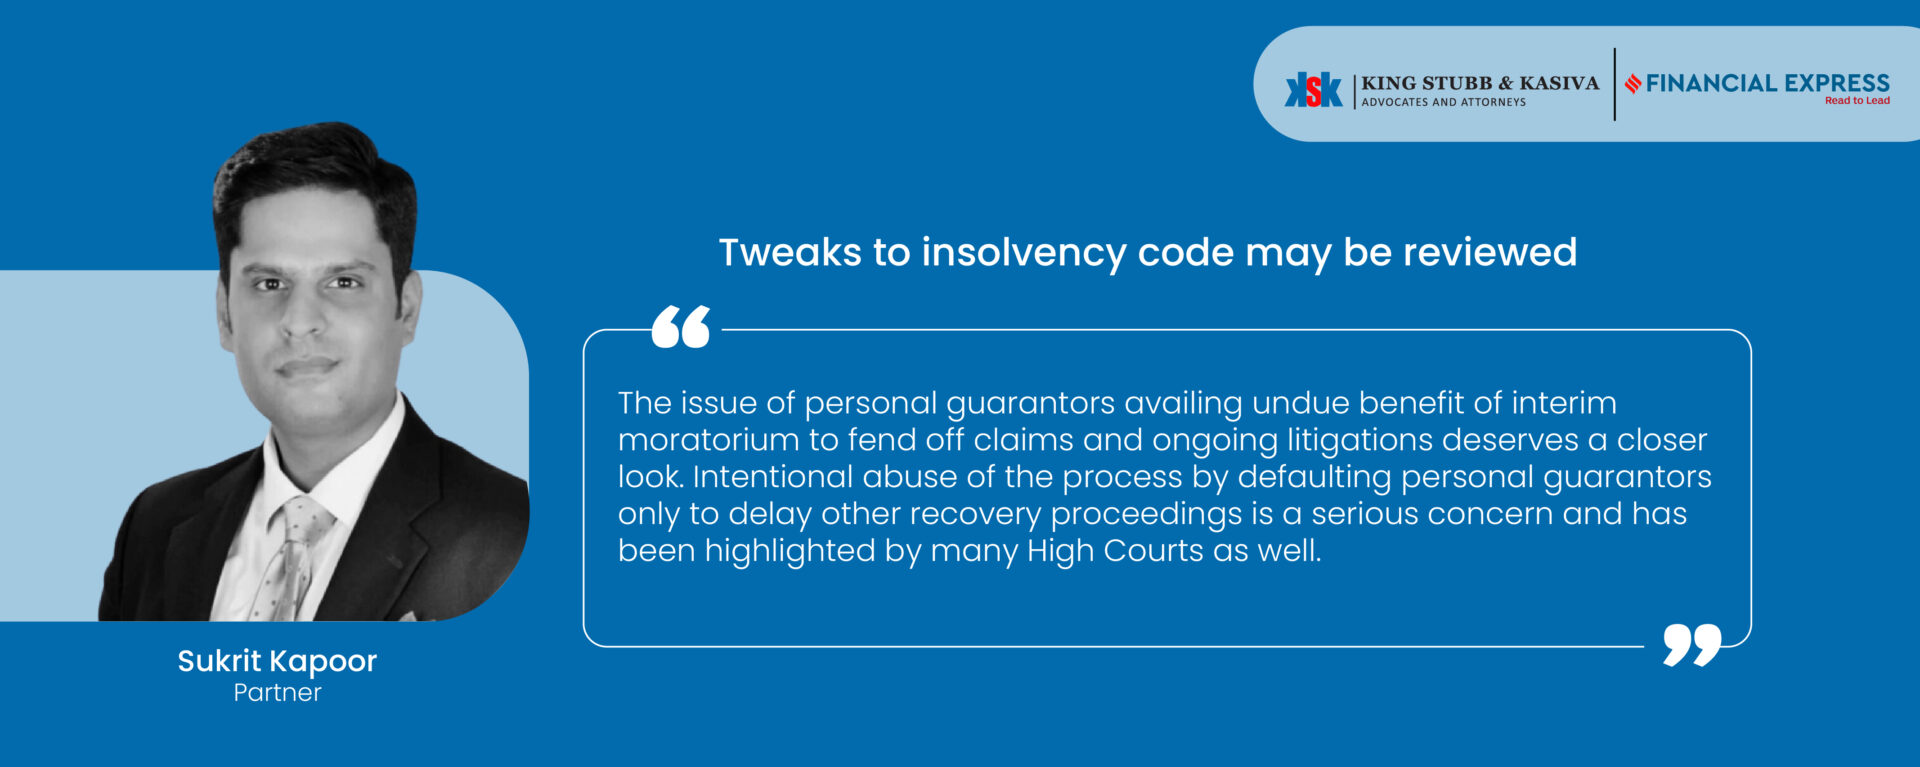 Sukrit R. Kapoor Highlights Abuse by Defaulting Personal Guarantors in Insolvency Code Review in an article in Financial Express